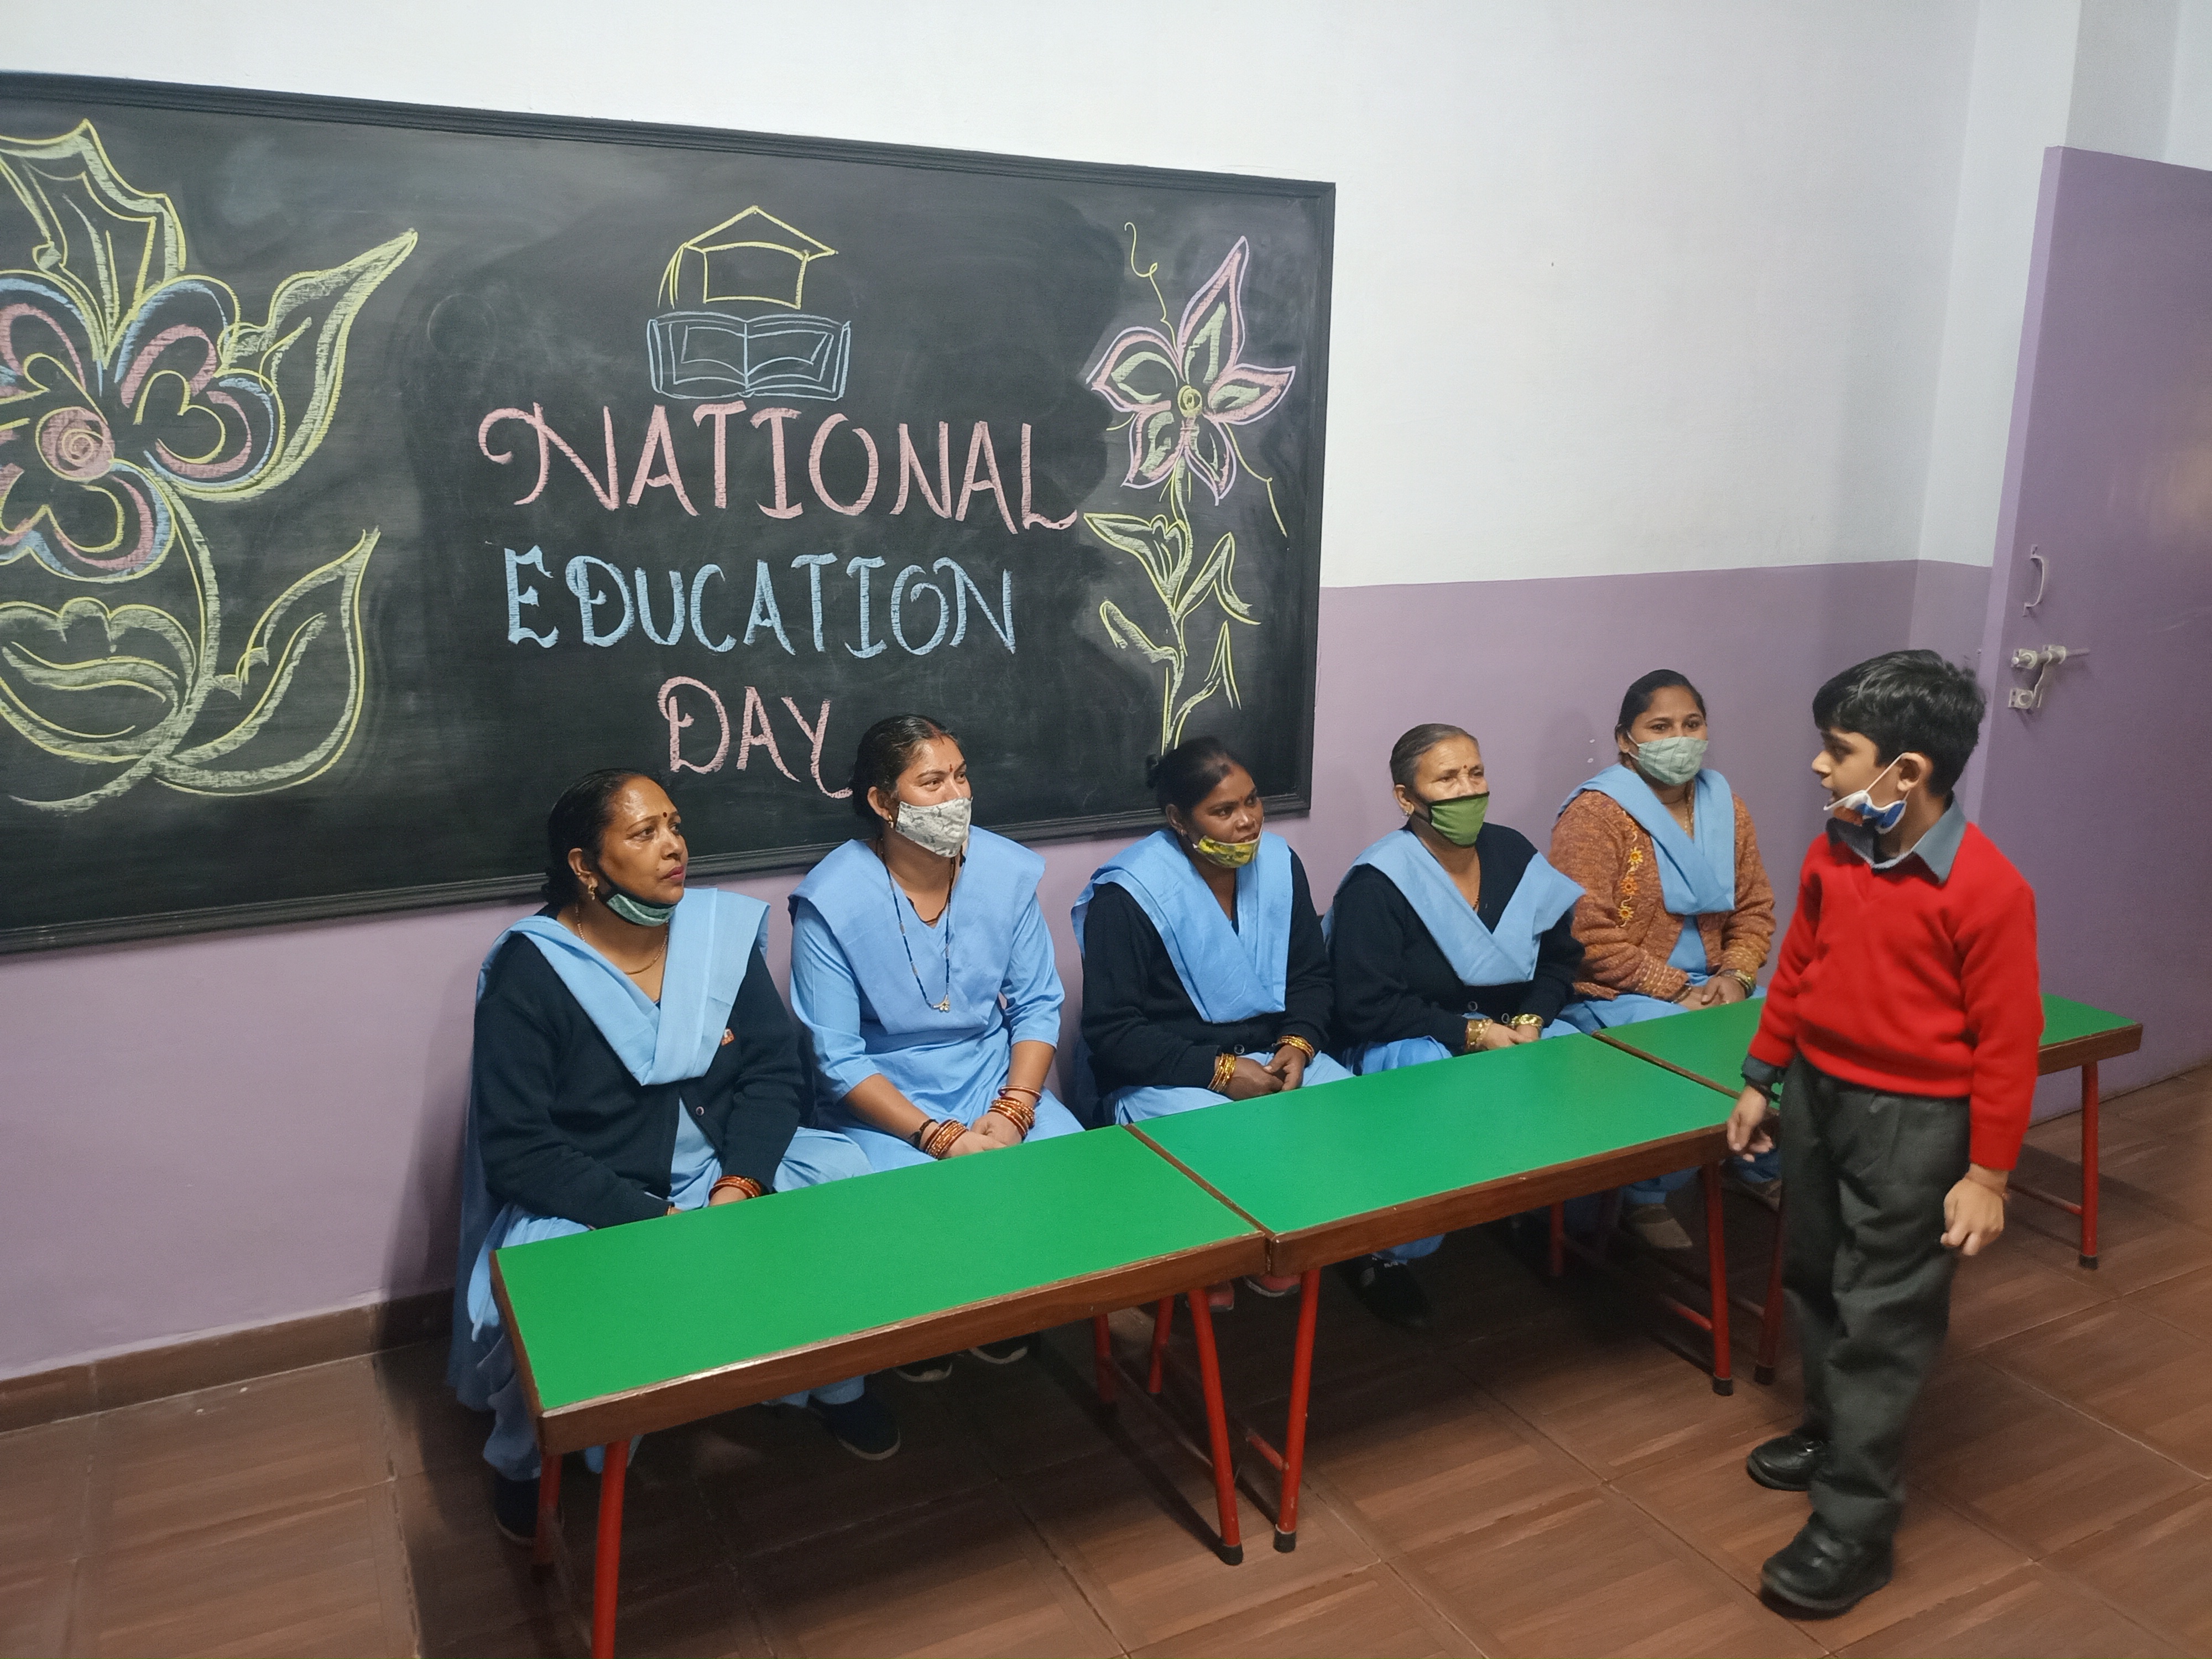 NATIONAL EDUCATION DAY